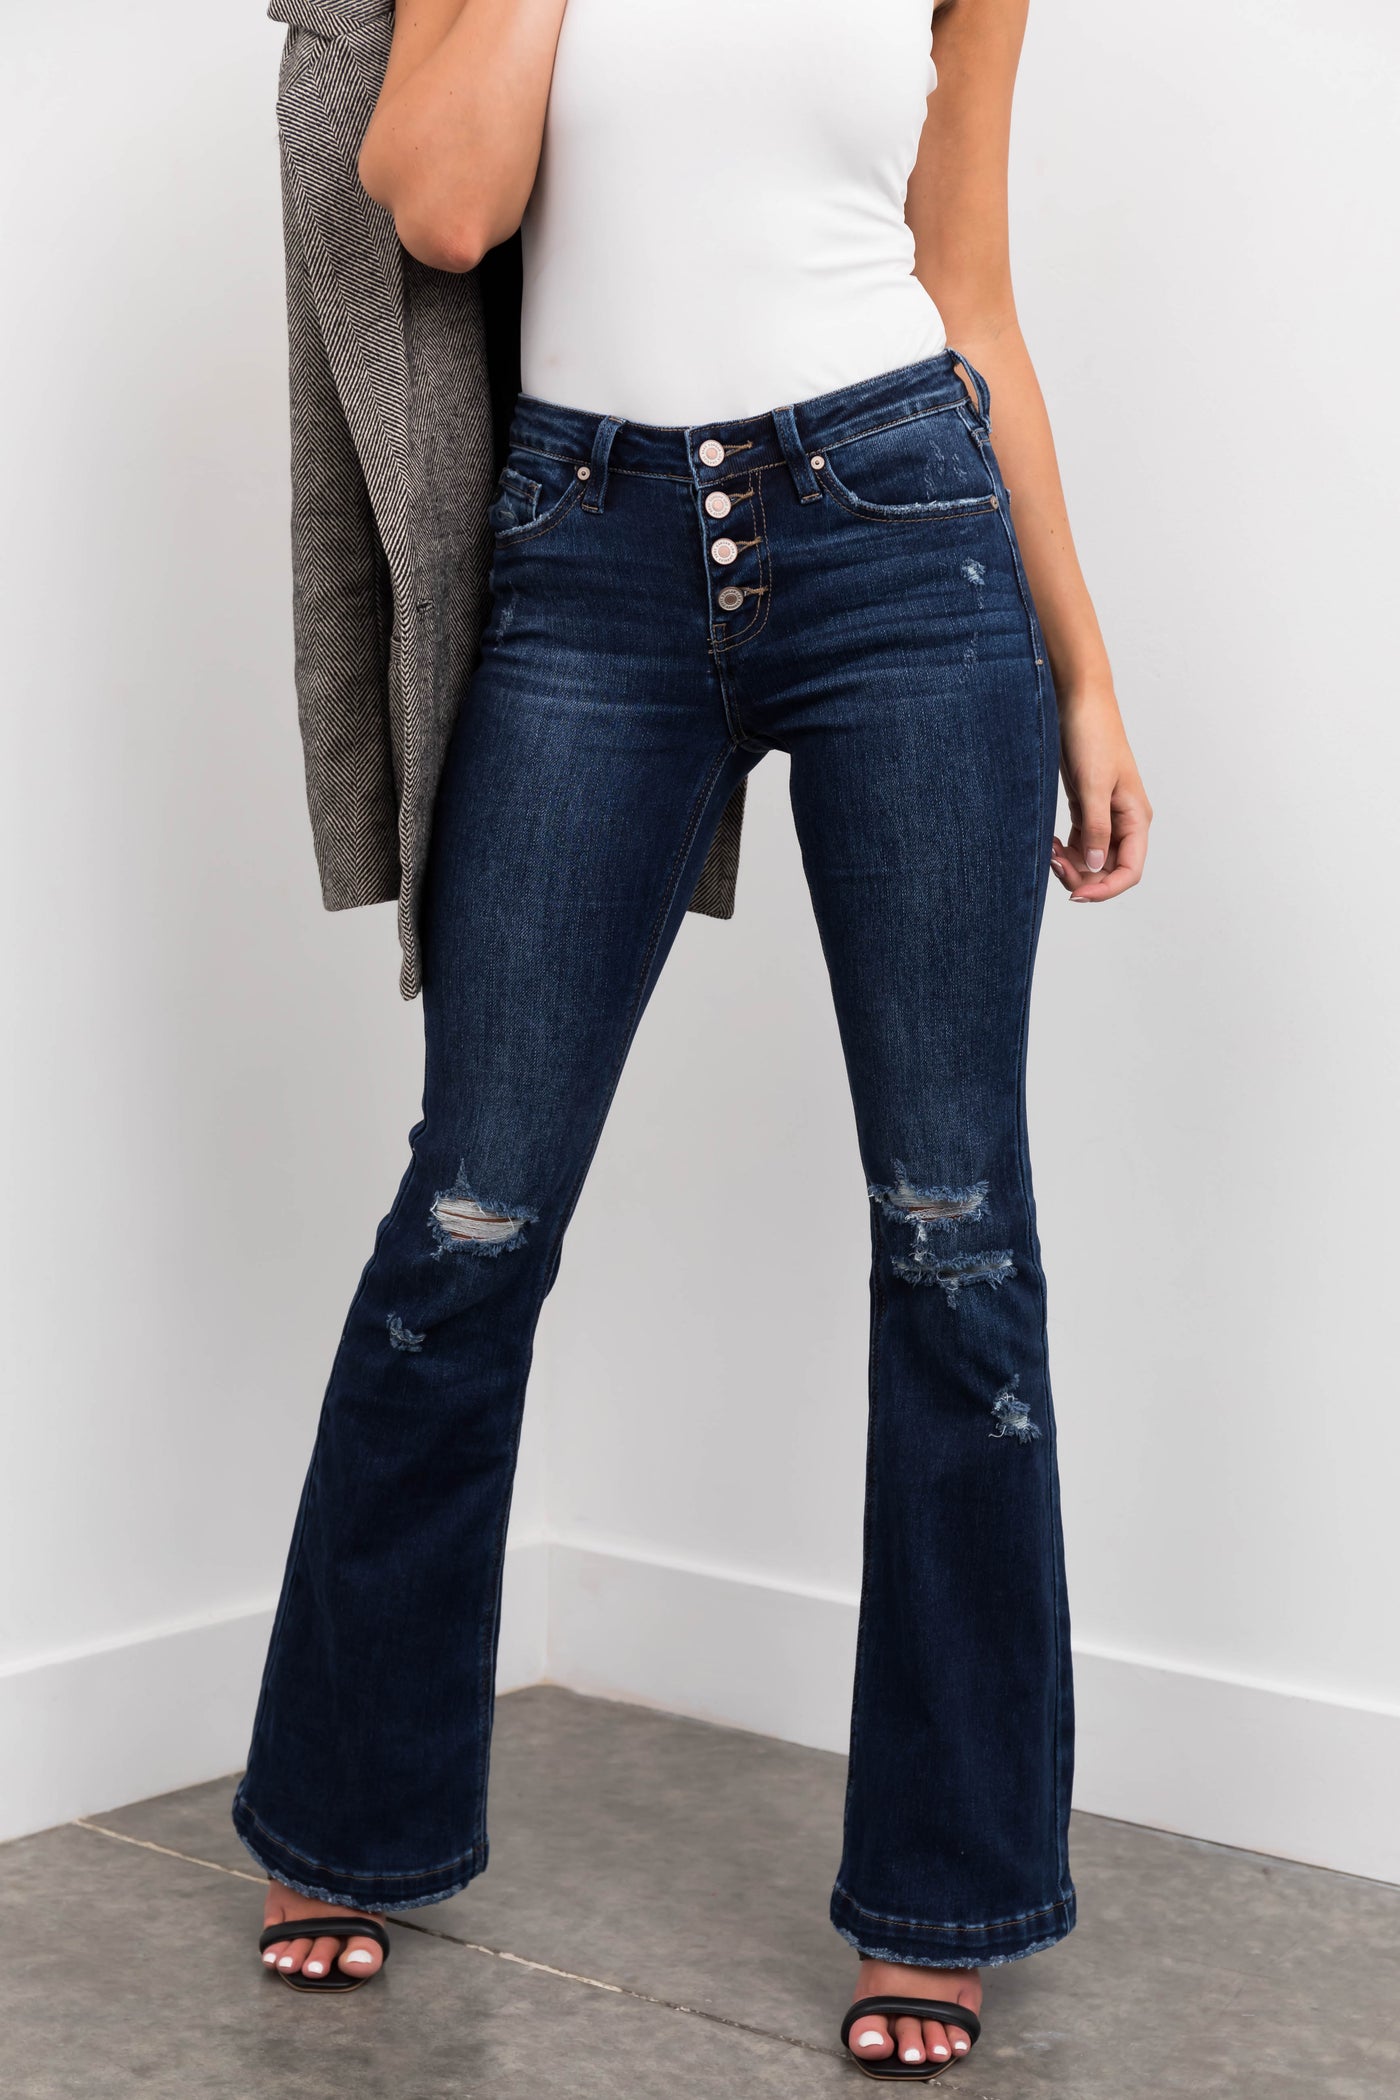 KanCan Dark Mid Rise Flare Jeans with Destroyed Knees